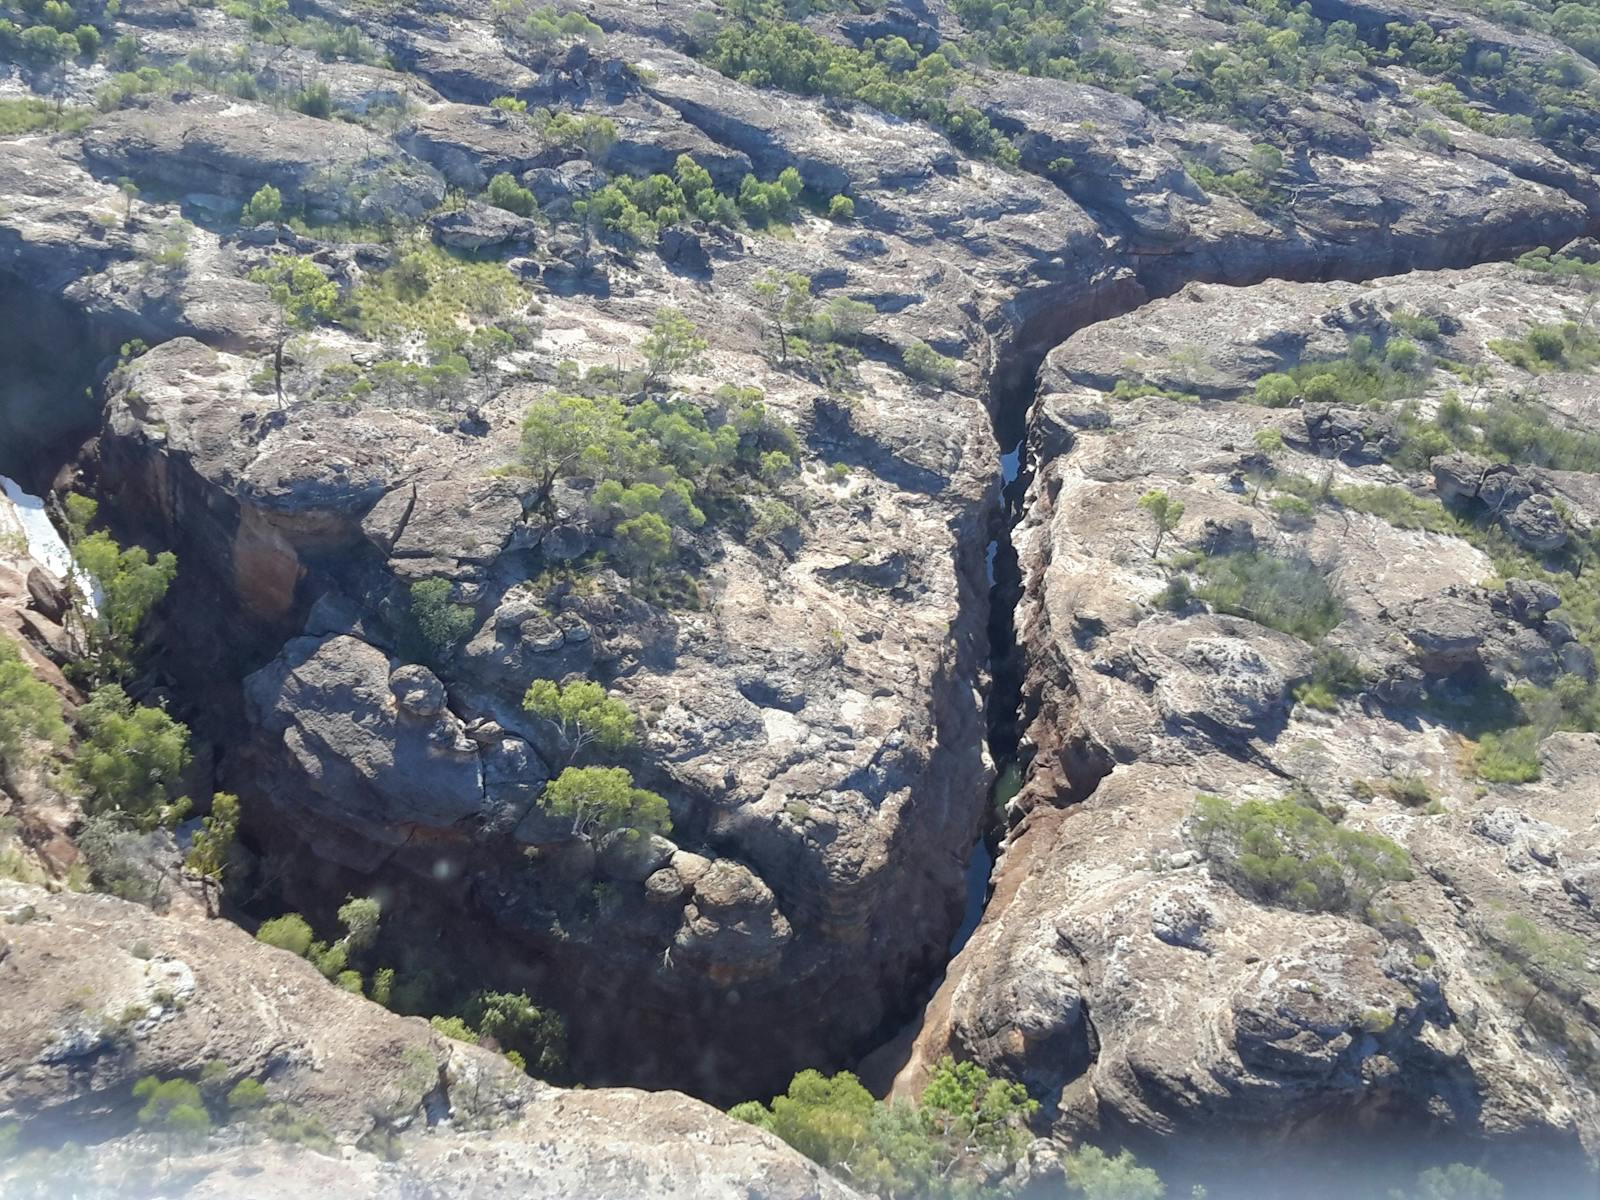 Cobbold Gorge from the air